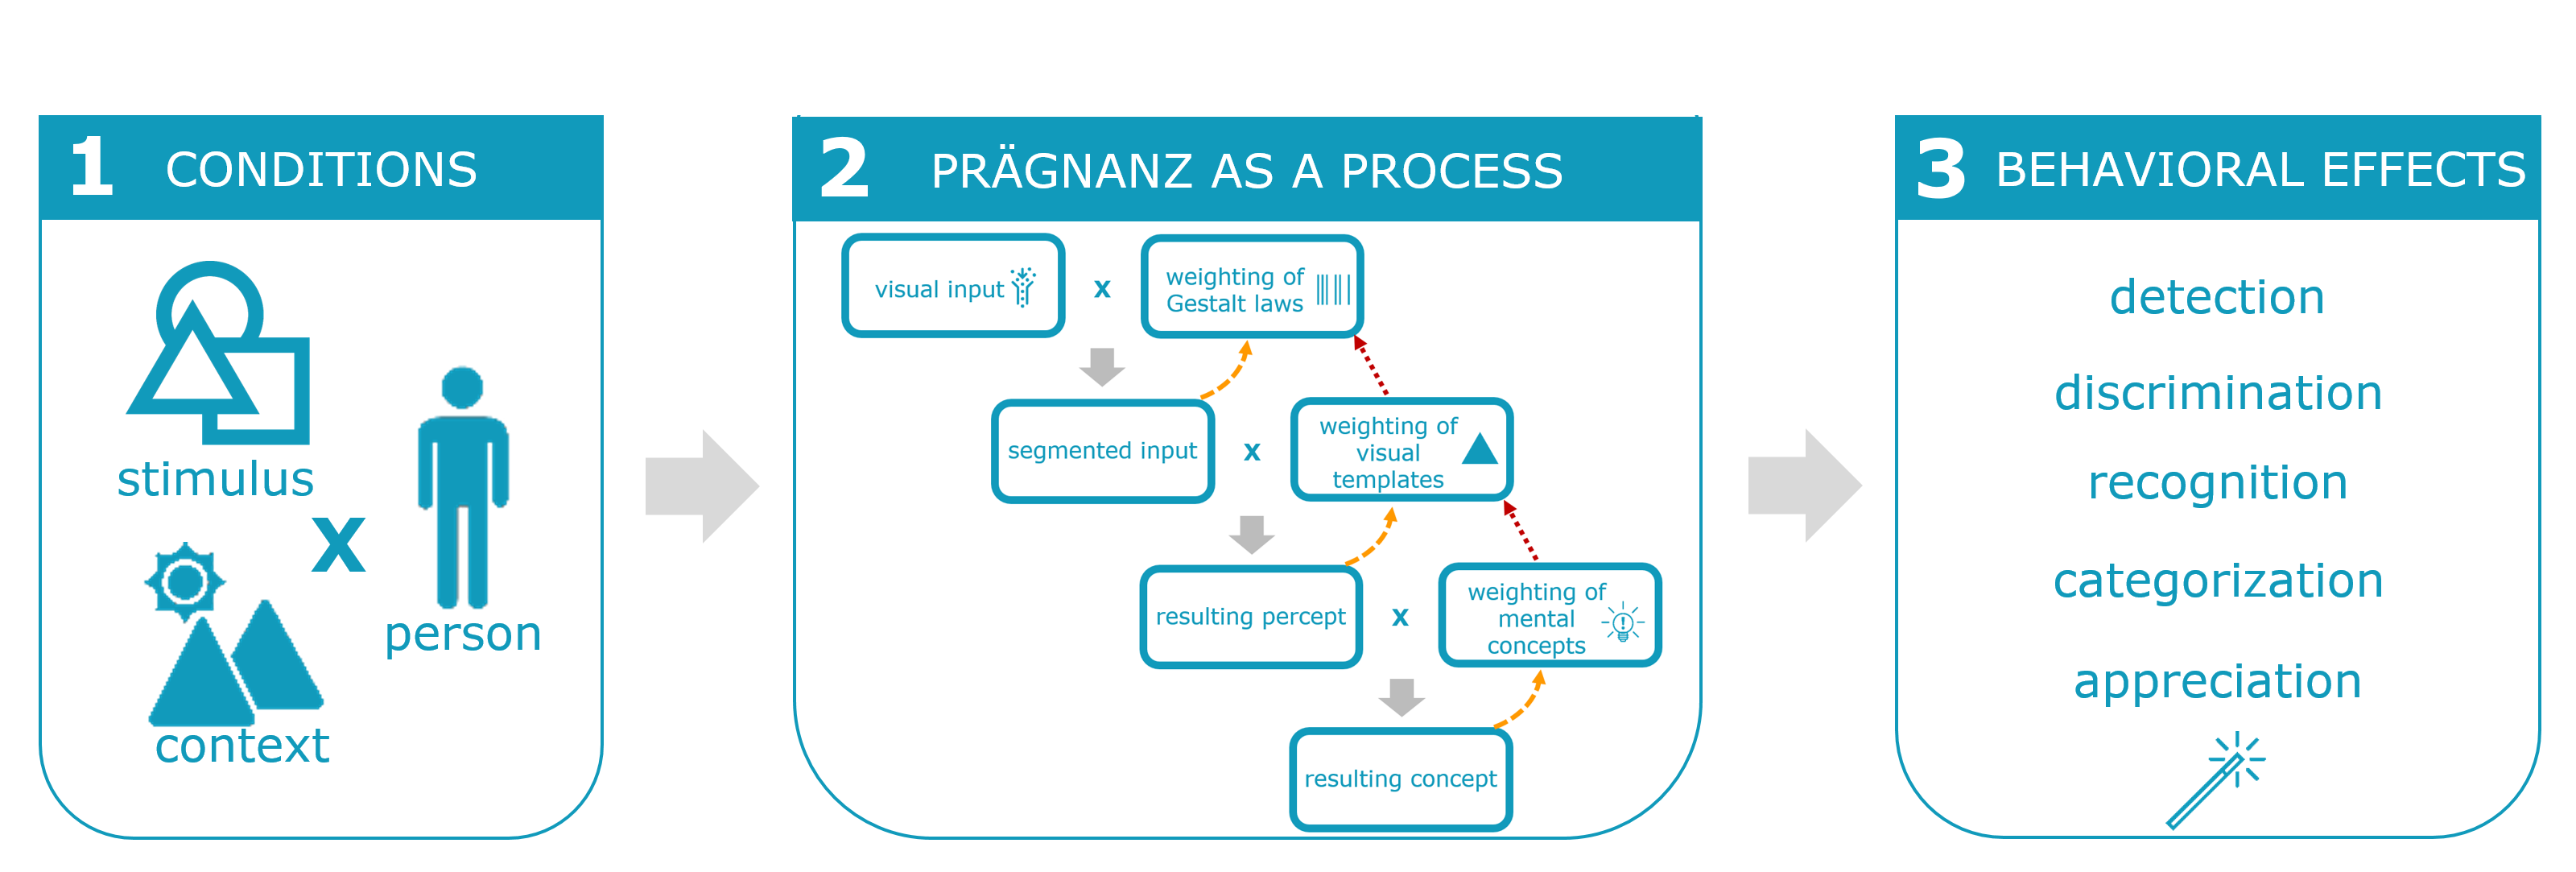 Illustration of current Prägnanz framework. The specific combination of internal and external conditions, related to stimulus, person, and context, codetermine what will be perceived and how prägnant that percept will be. The Prägnanz level of a percept can in its turn have several behavioral effects, including effects on perceptual categorization, discrimination, and aesthetic appreciation.